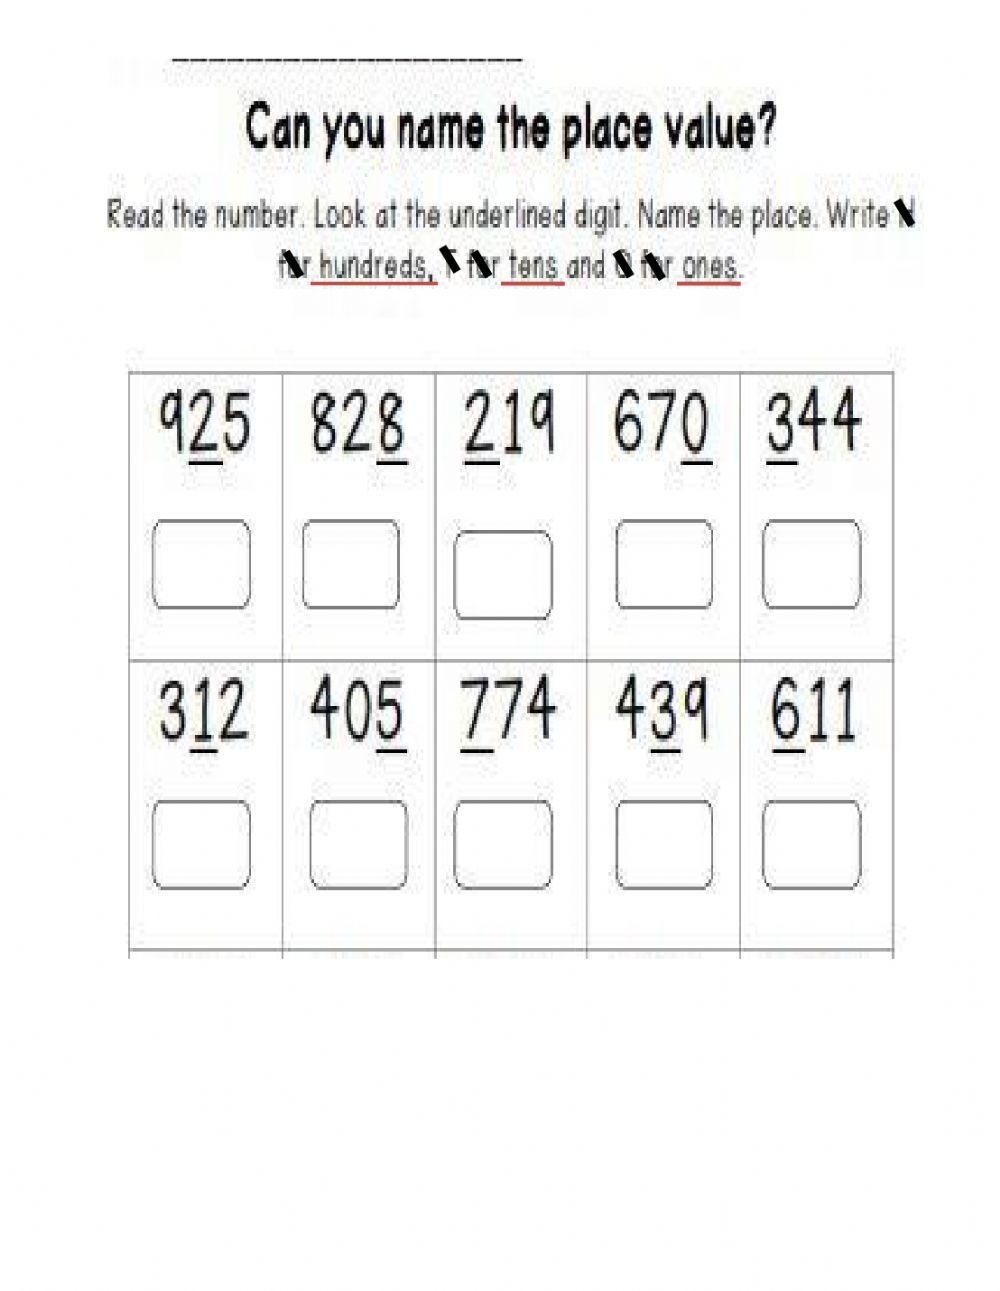 Place Value (Hundreds, Tens and Ones)